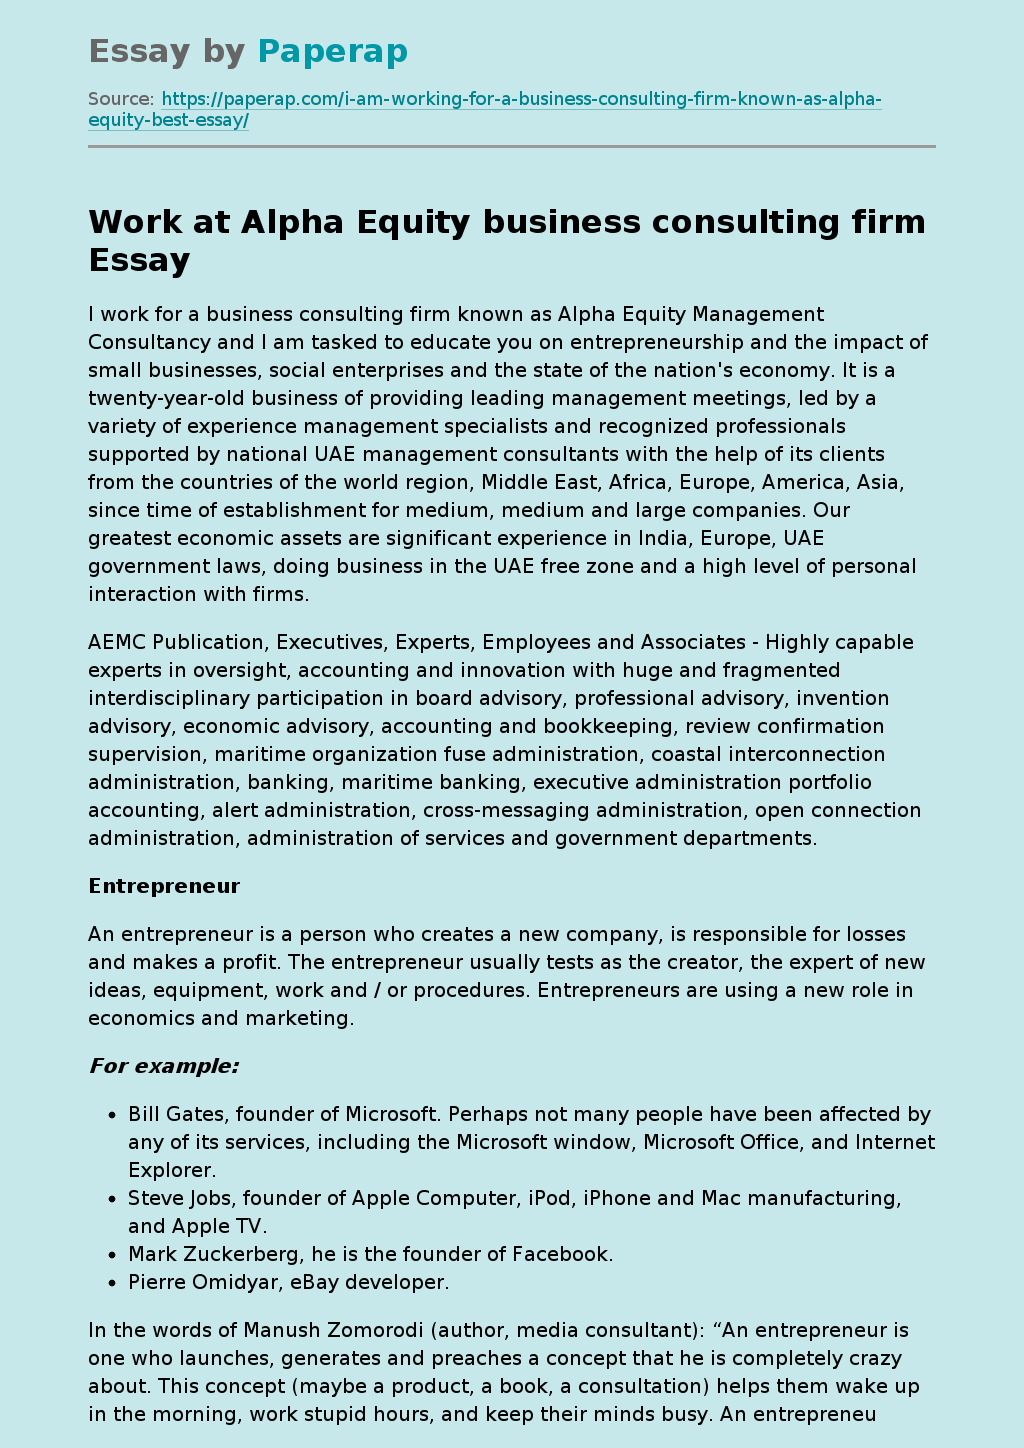 Work at Alpha Equity business consulting firm